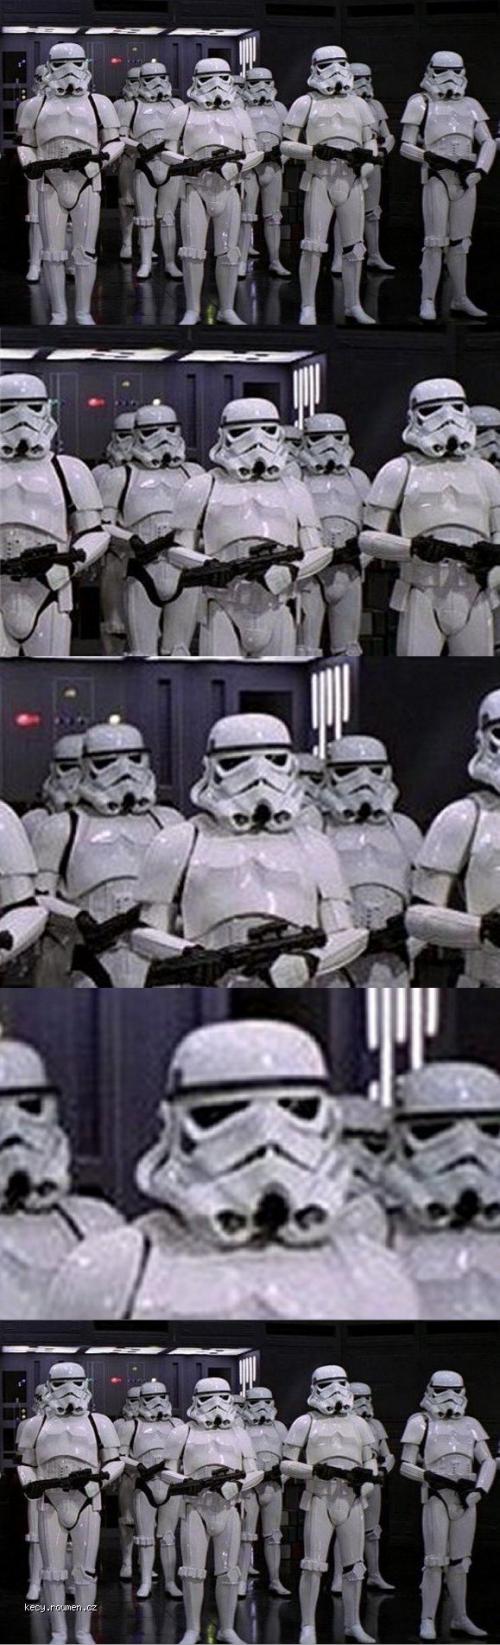  storm troopers tenso 